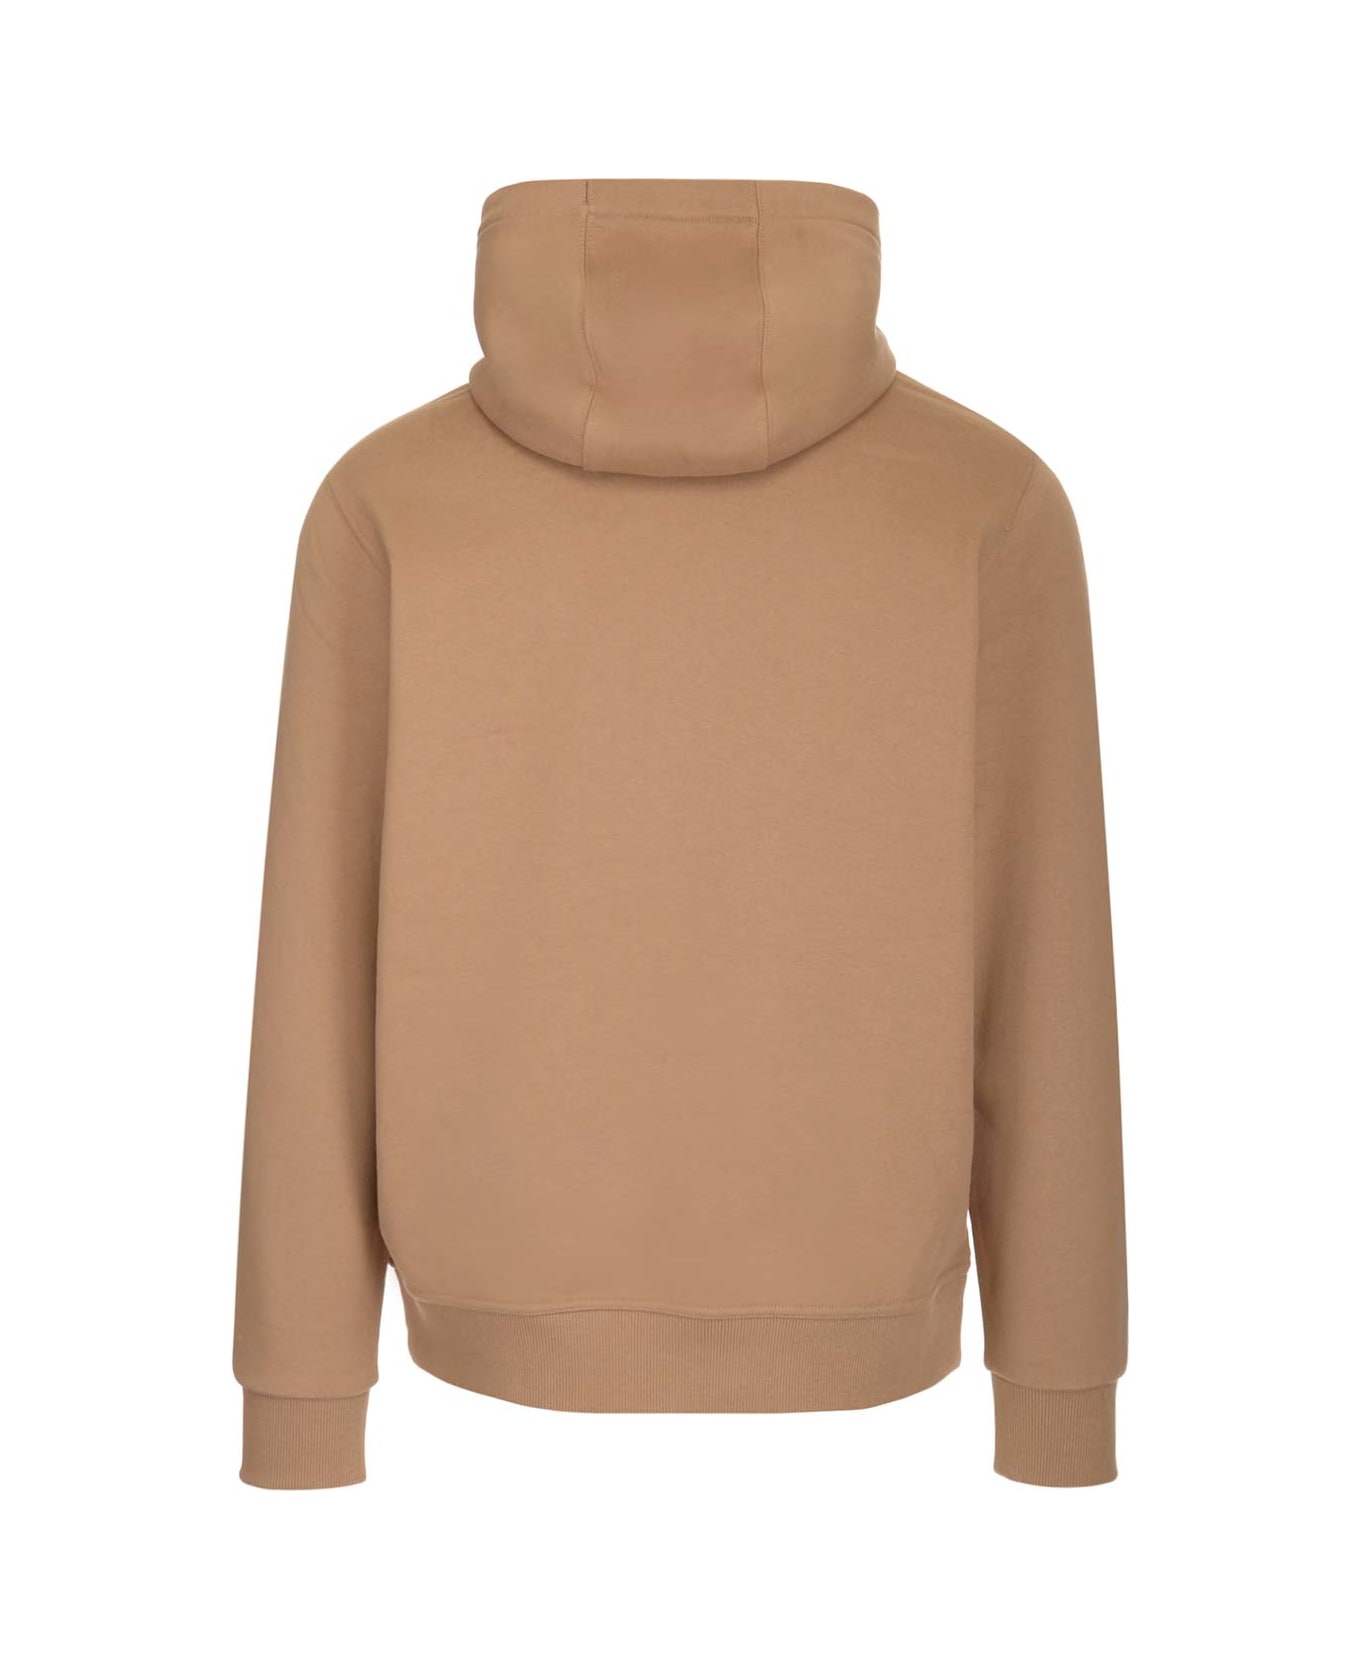 Burberry Camel Colored Cotton Hoodie - Brown